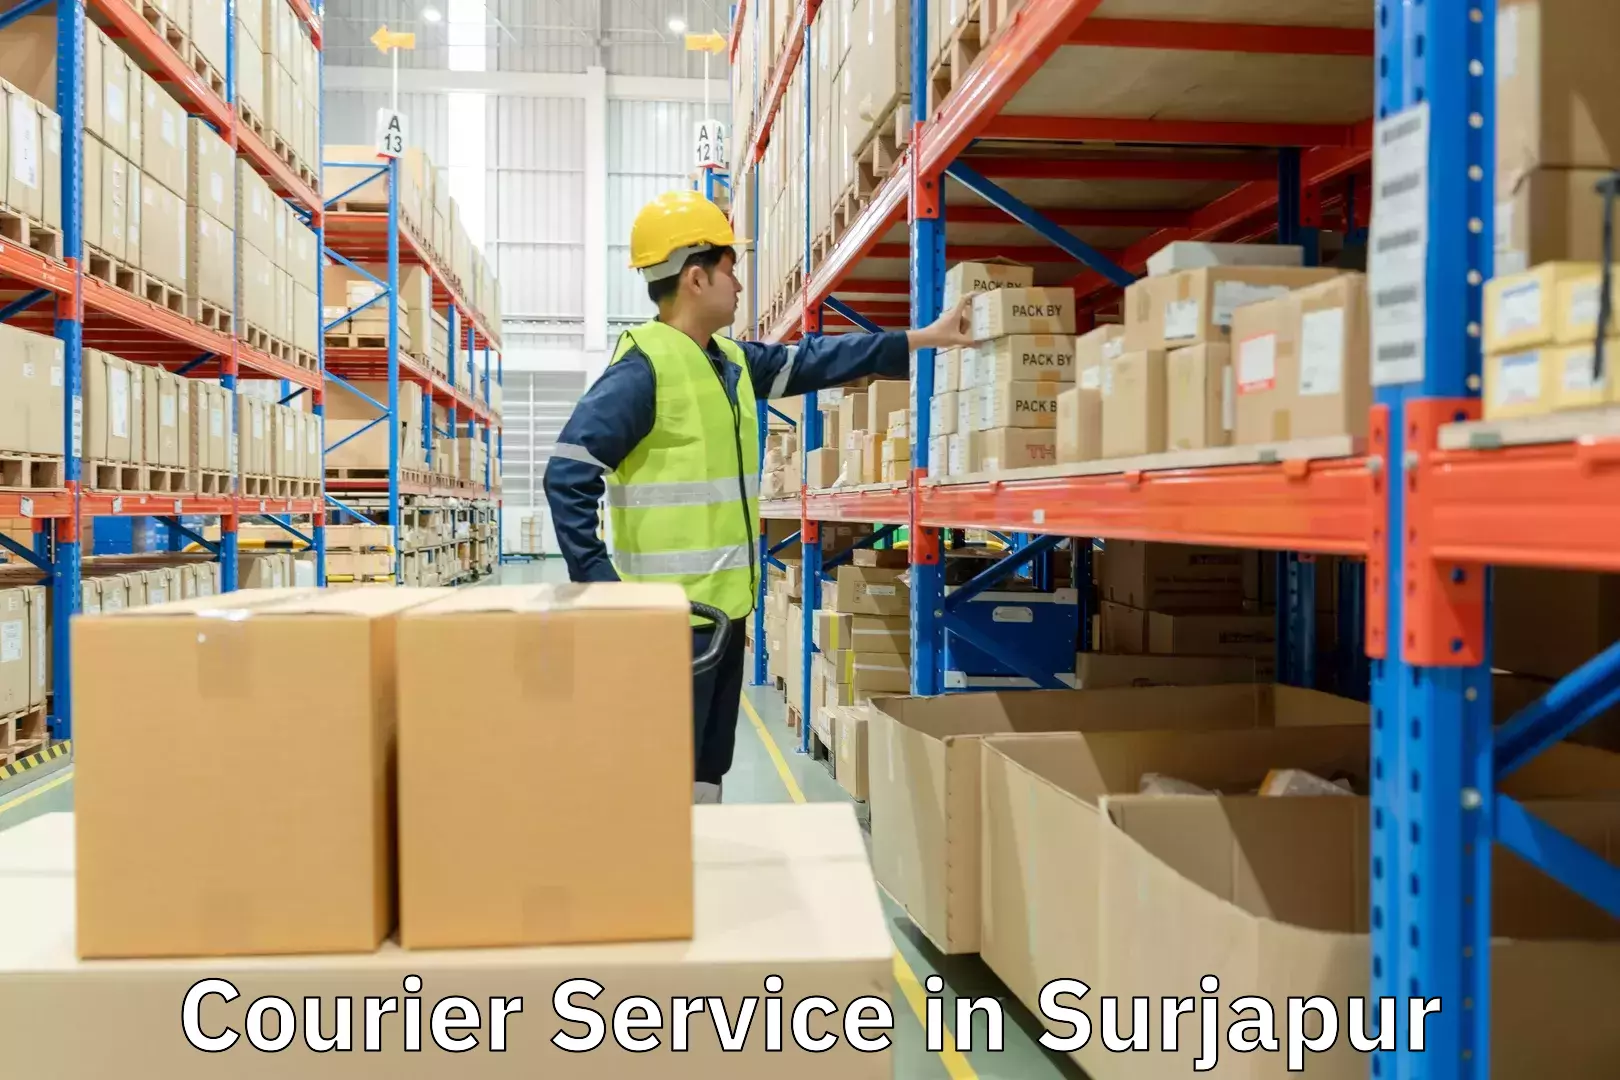 Tech-enabled shipping in Surjapur